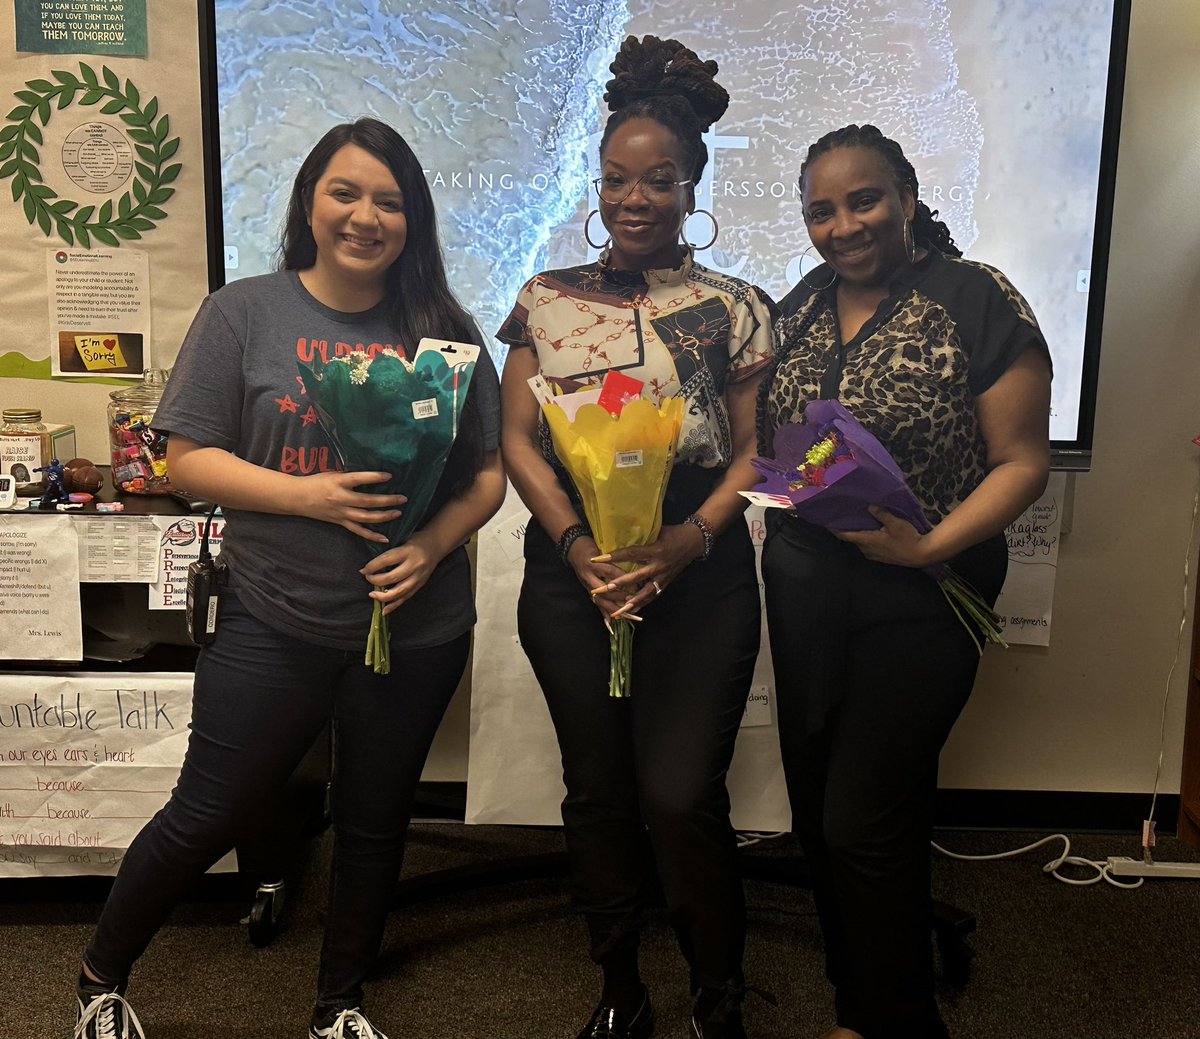 We celebrated our BASE/BASE+ paras a week early since I won’t be there next week. These ladies are amazing! 🥰🫶🏾 Don’t forget next week is Para appreciation week! We wouldn’t be able to do our jobs efficiently without ParaPros!💙❤️